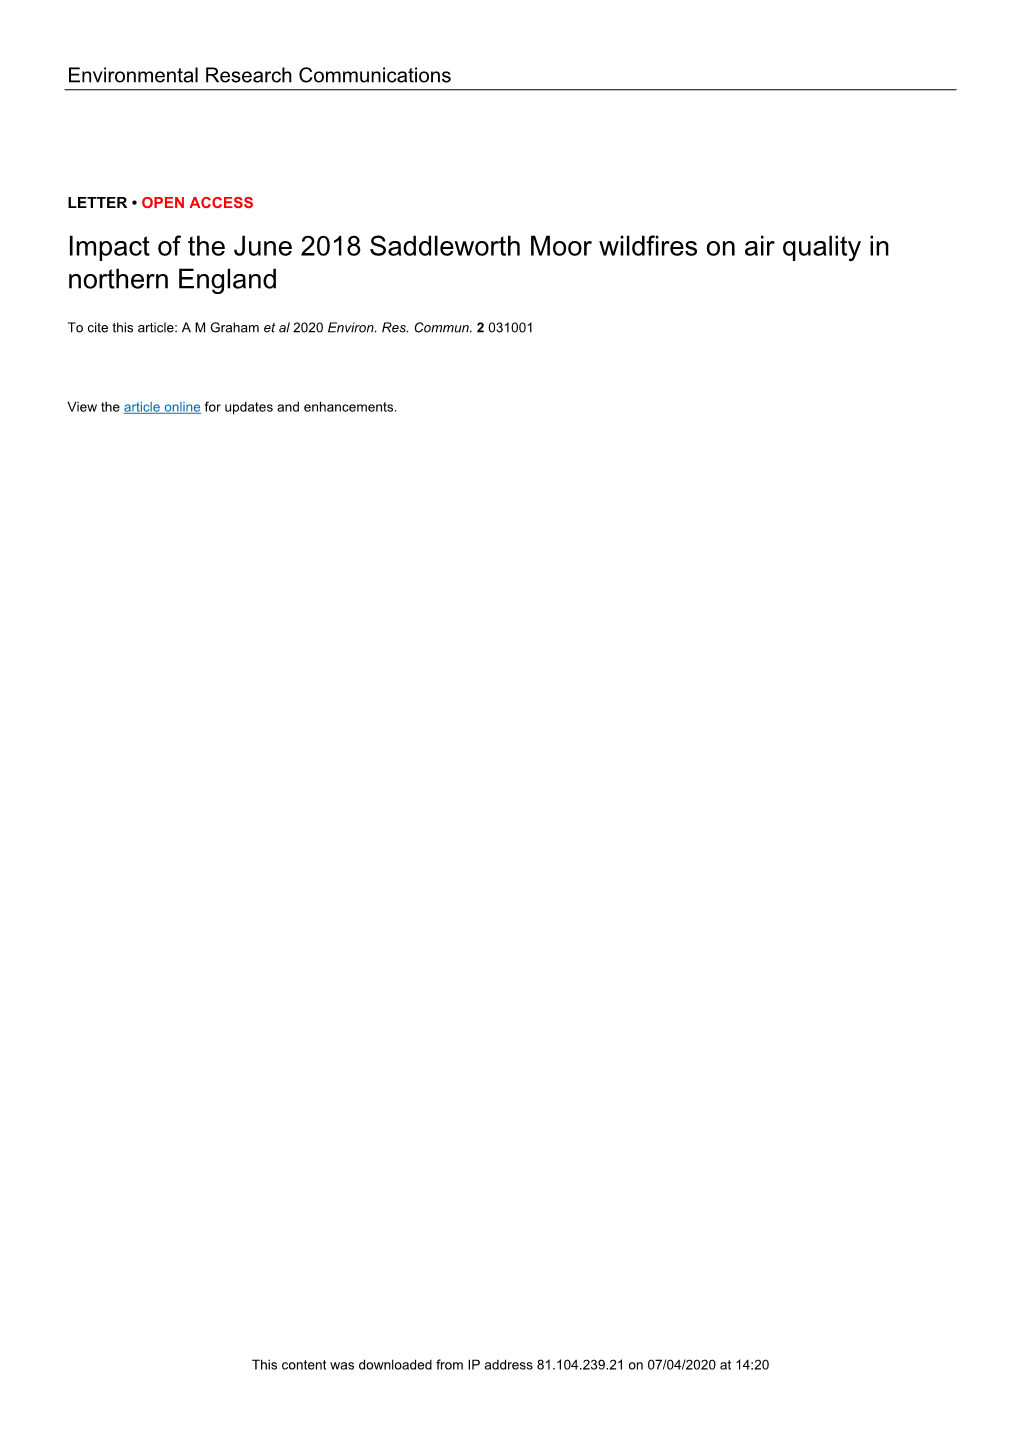 Impact of the June 2018 Saddleworth Moor Wildfires on Air Quality in Northern England